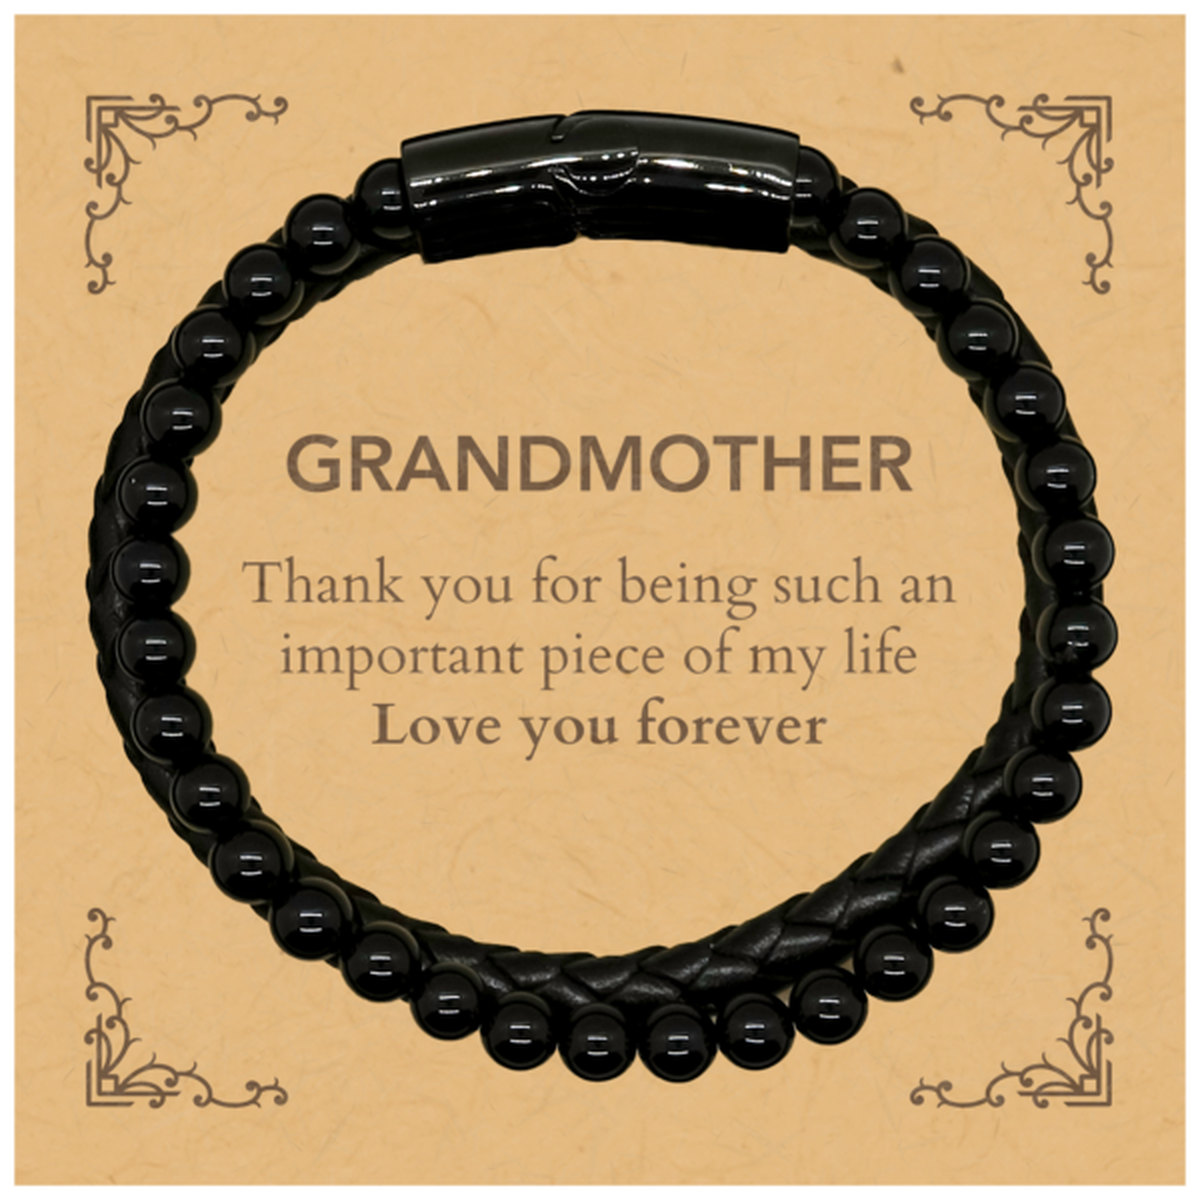 Appropriate Grandmother Stone Leather Bracelets Epic Birthday Gifts for Grandmother Thank you for being such an important piece of my life Grandmother Christmas Mothers Fathers Day